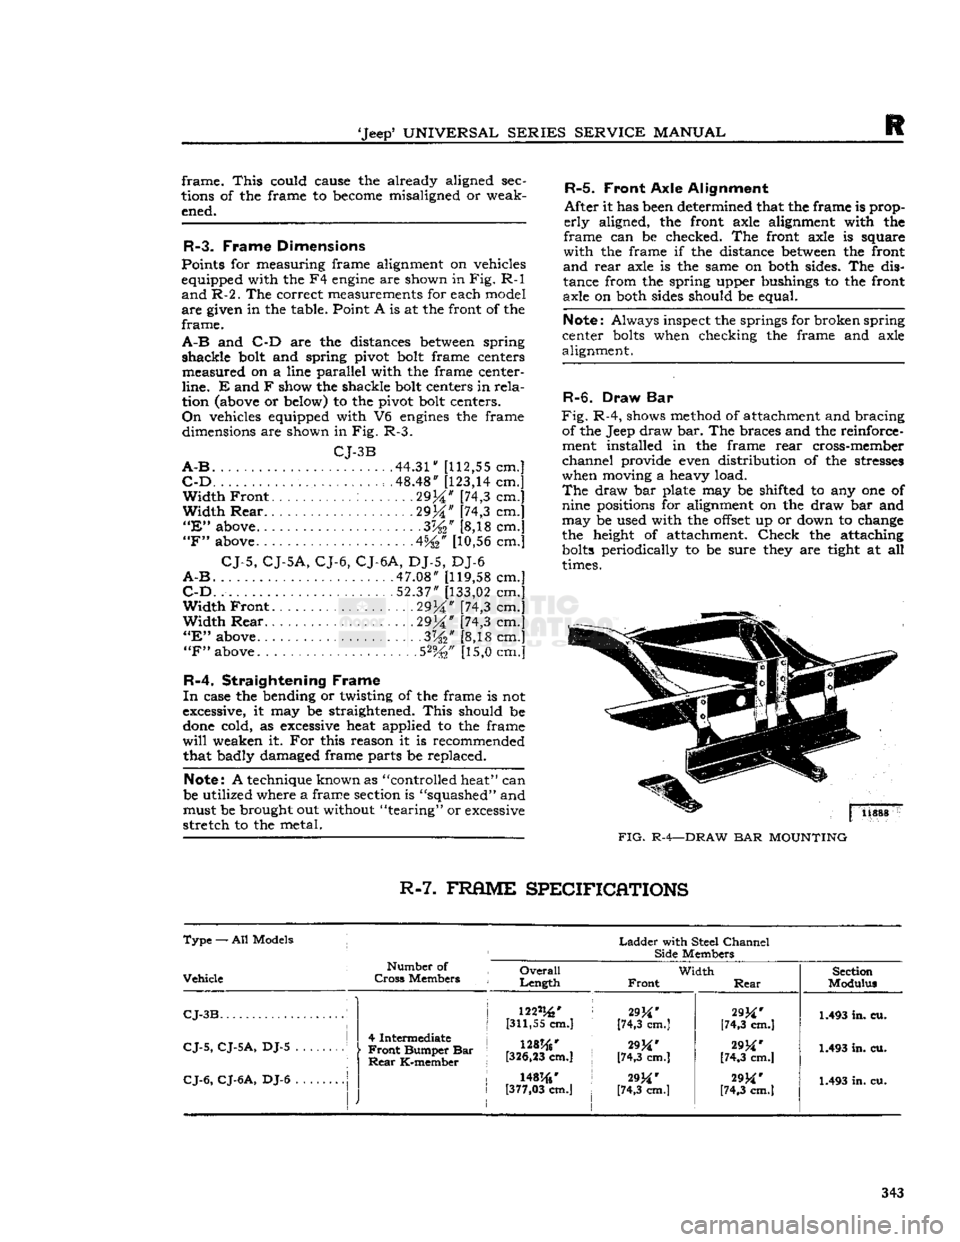 JEEP CJ 1953  Service Manual 
Jeep*
 UNIVERSAL
 SERIES
 SERVICE
 MANUAL 

R 
frame.
 This
 could cause the already aligned sec­
tions of the frame to
 become
 misaligned or weak­ ened. 

R-3.
 Frame Dimensions 
Points for meas